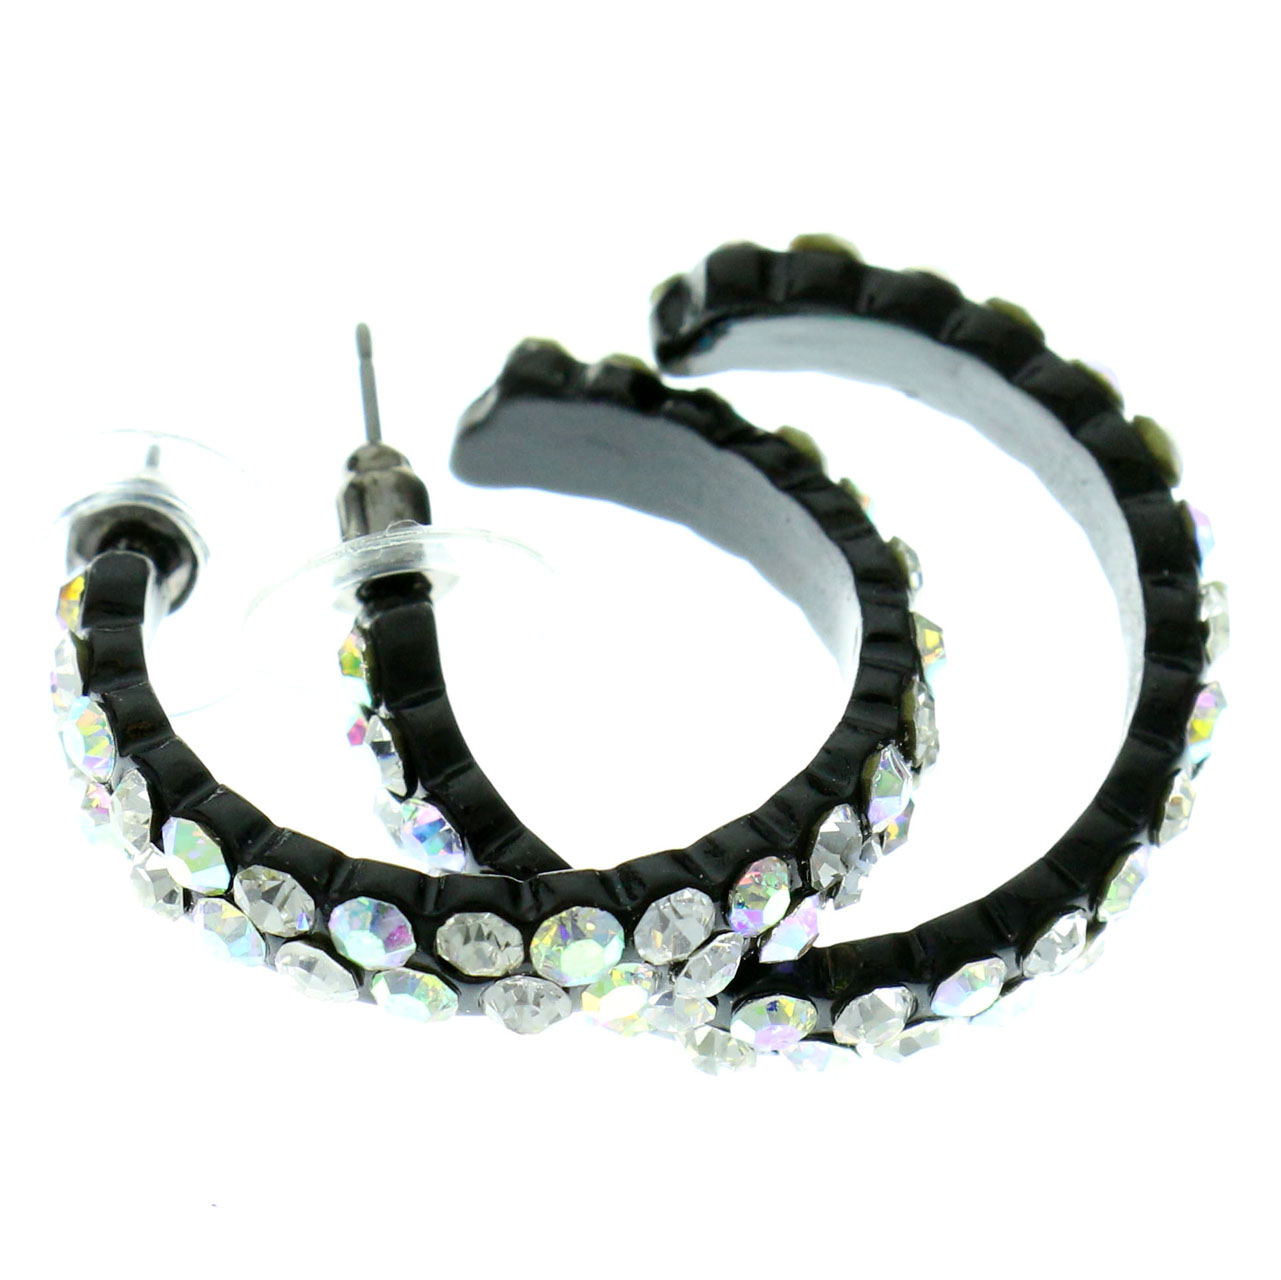 MI AMORE Black Hoop Earrings With Sparkling Iridescent Faceted Crystal Accents